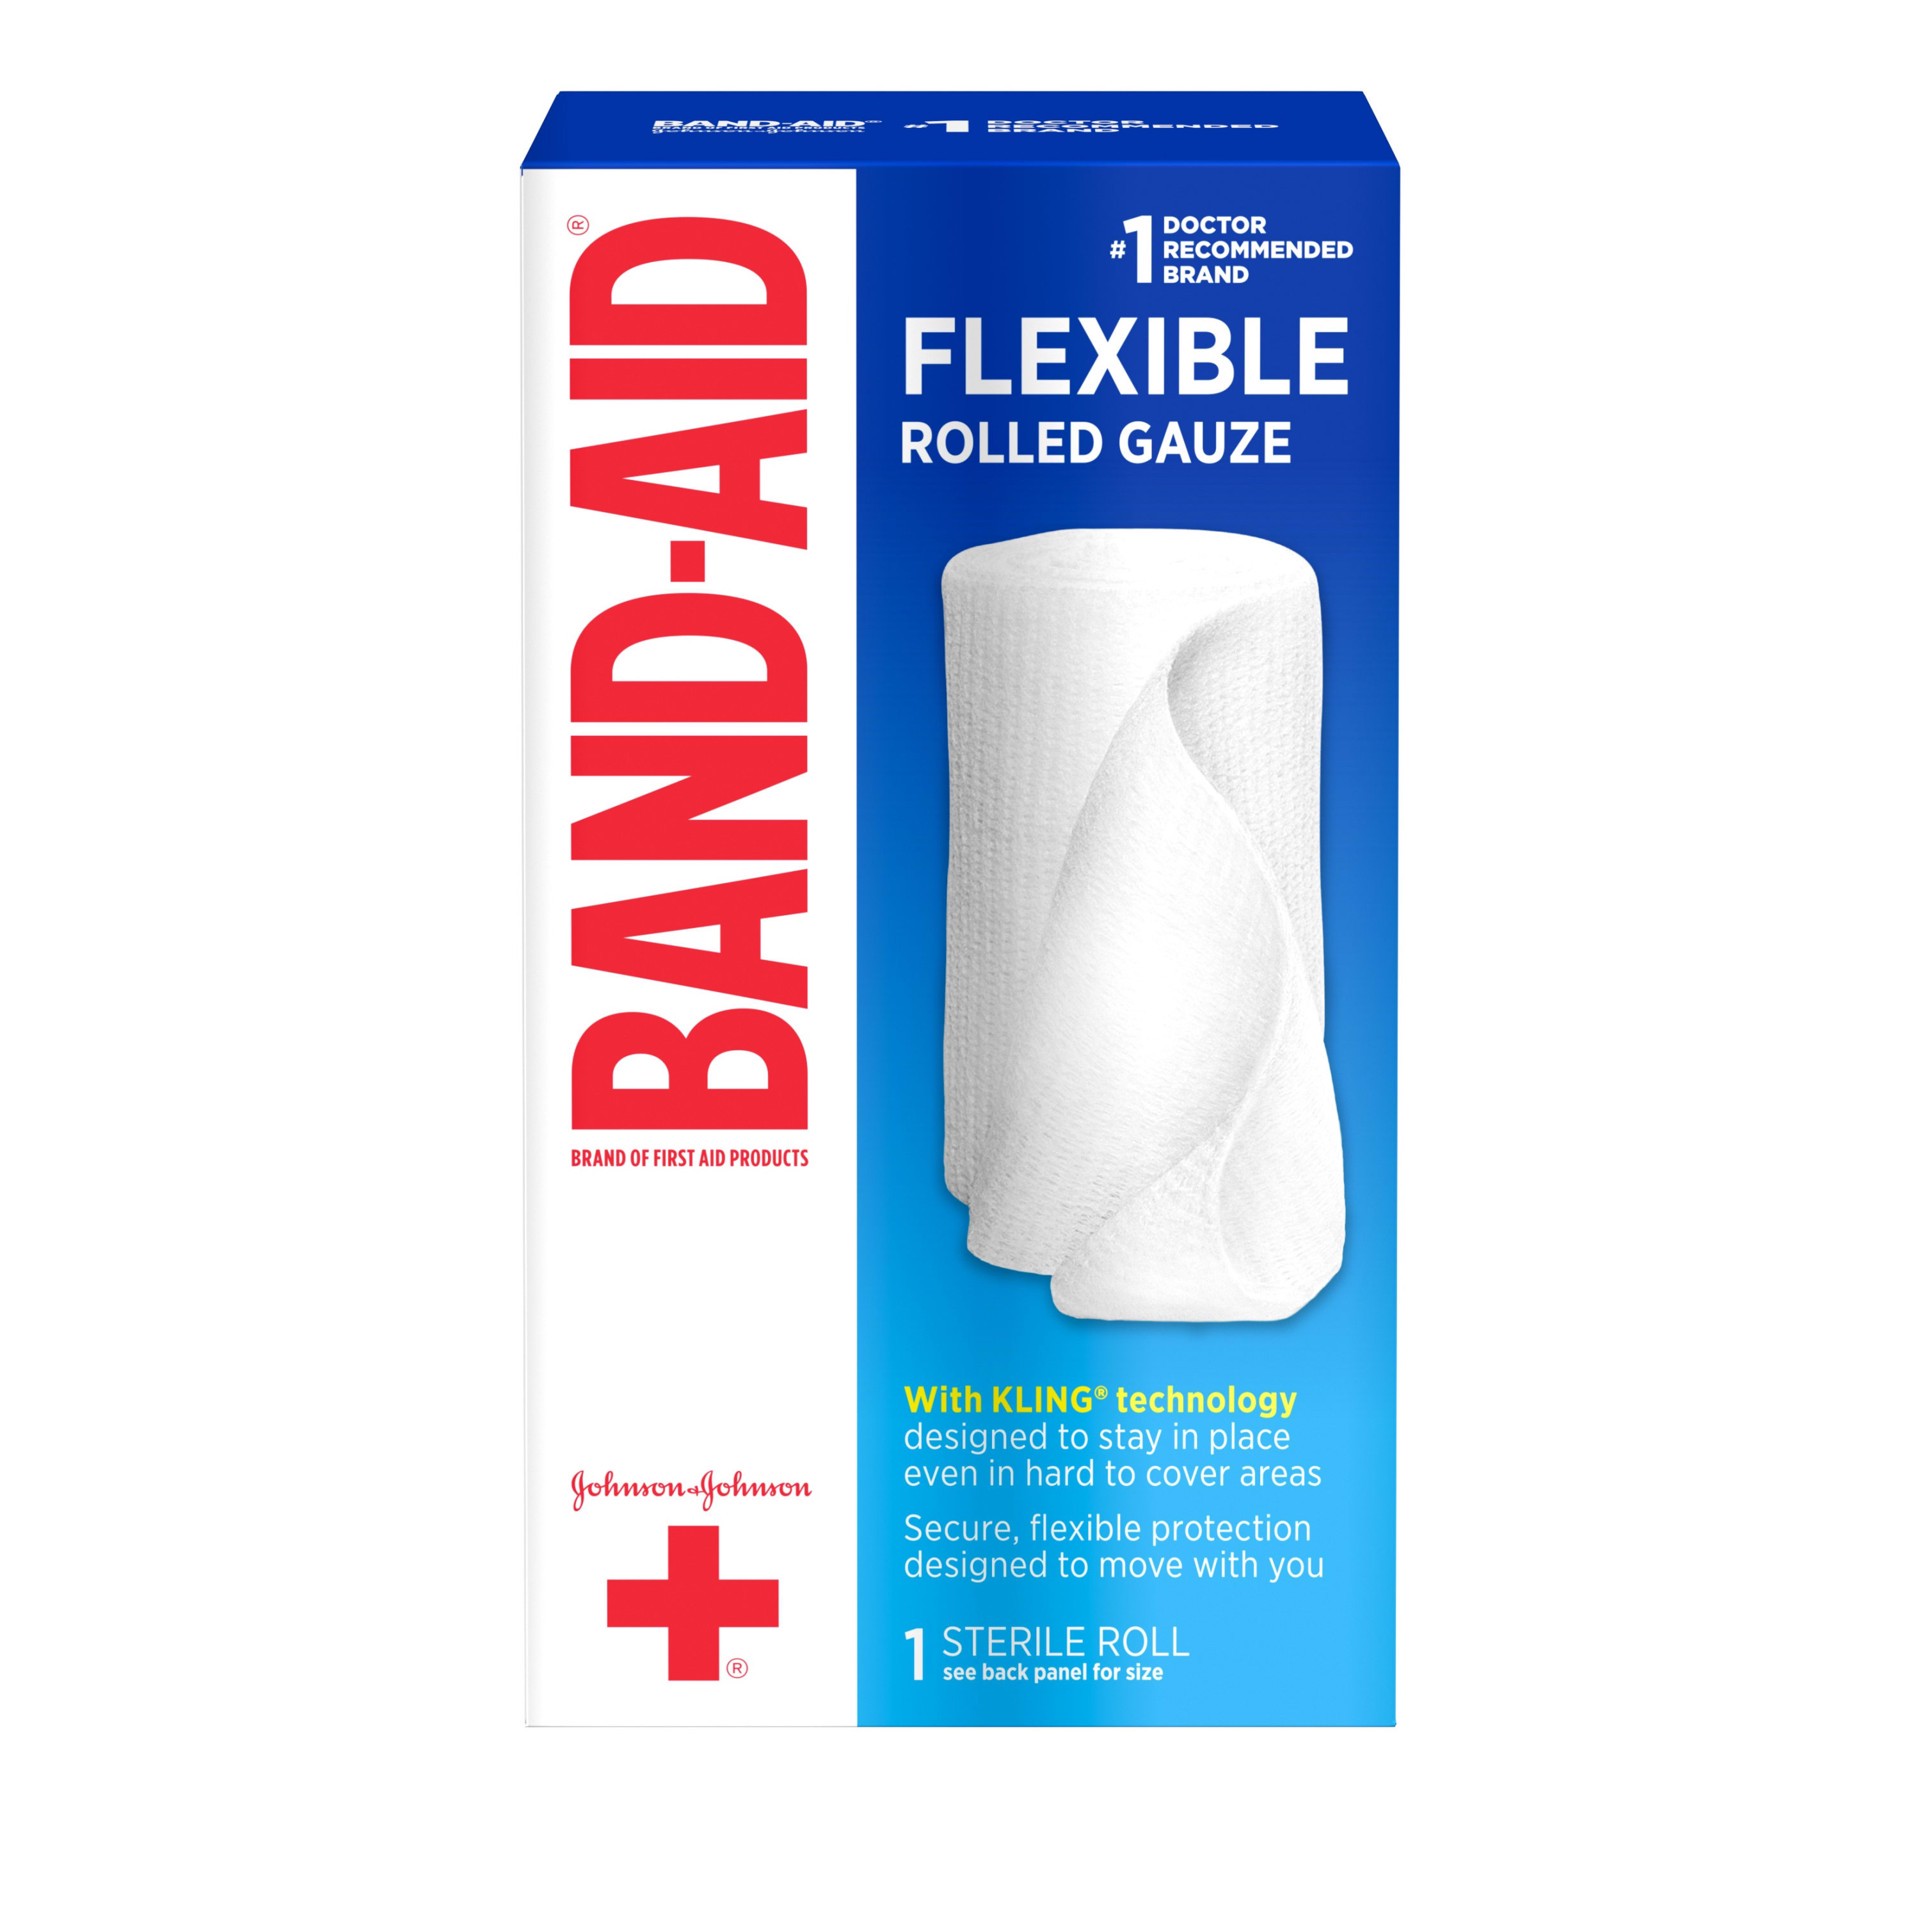 slide 1 of 5, BAND-AID Band Aid Brand of First Aid Products Flexible Rolled Gauze Dressing for Minor Wound Care, soft Padding and Instant Absorption, 3 Inches by 2.5 Yards, 1 ct